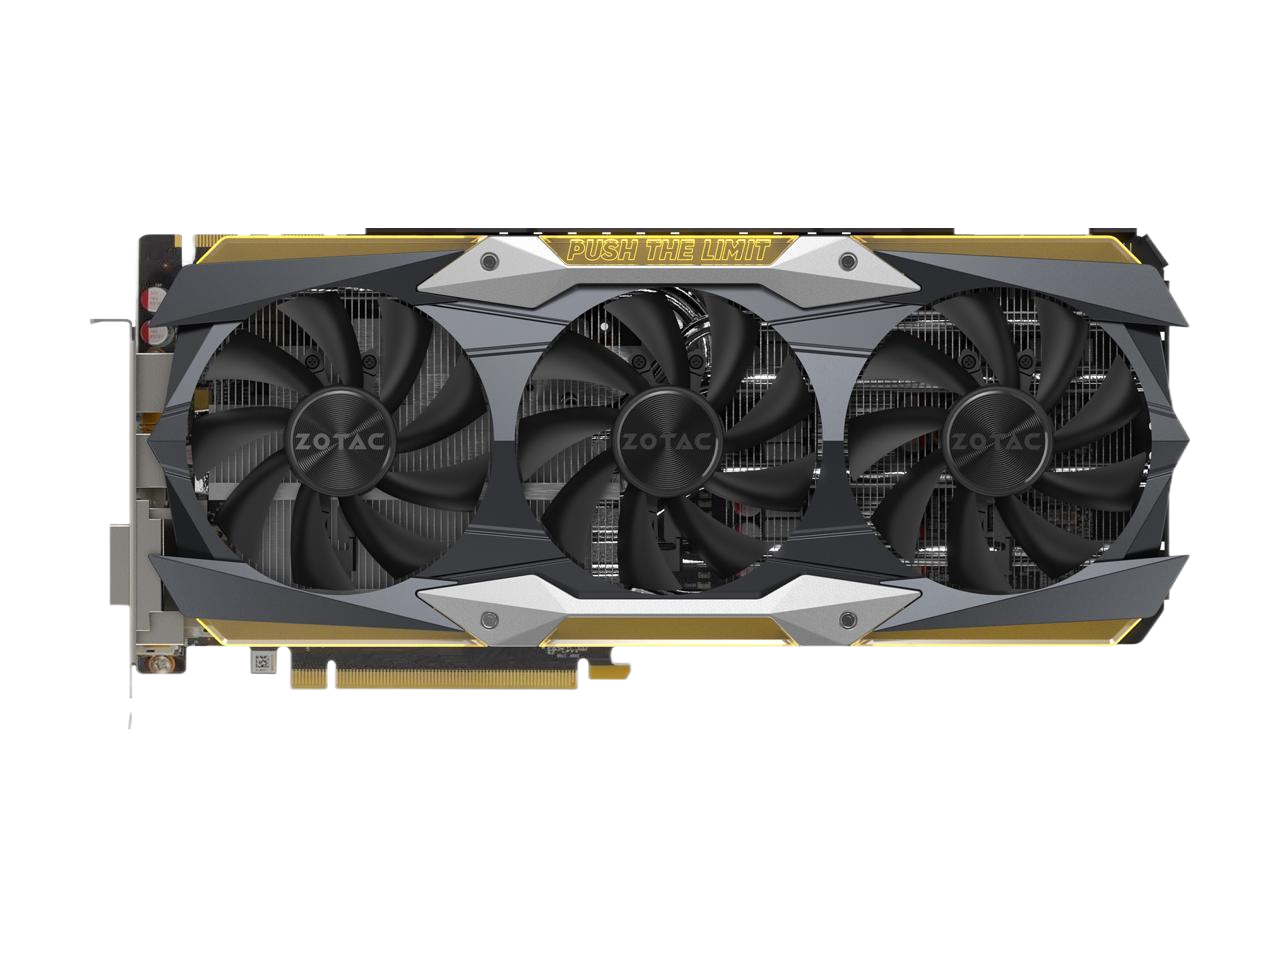 ZOTAC GeForce GTX 1080 Ti AMP Extreme Core 11GB GDDR5X 352-bit Gaming Graphics Card VR Ready 16+2 Power Phase Freeze Fan Stop IceStorm Cooling Spectra Lighting ZT-P10810F-10P